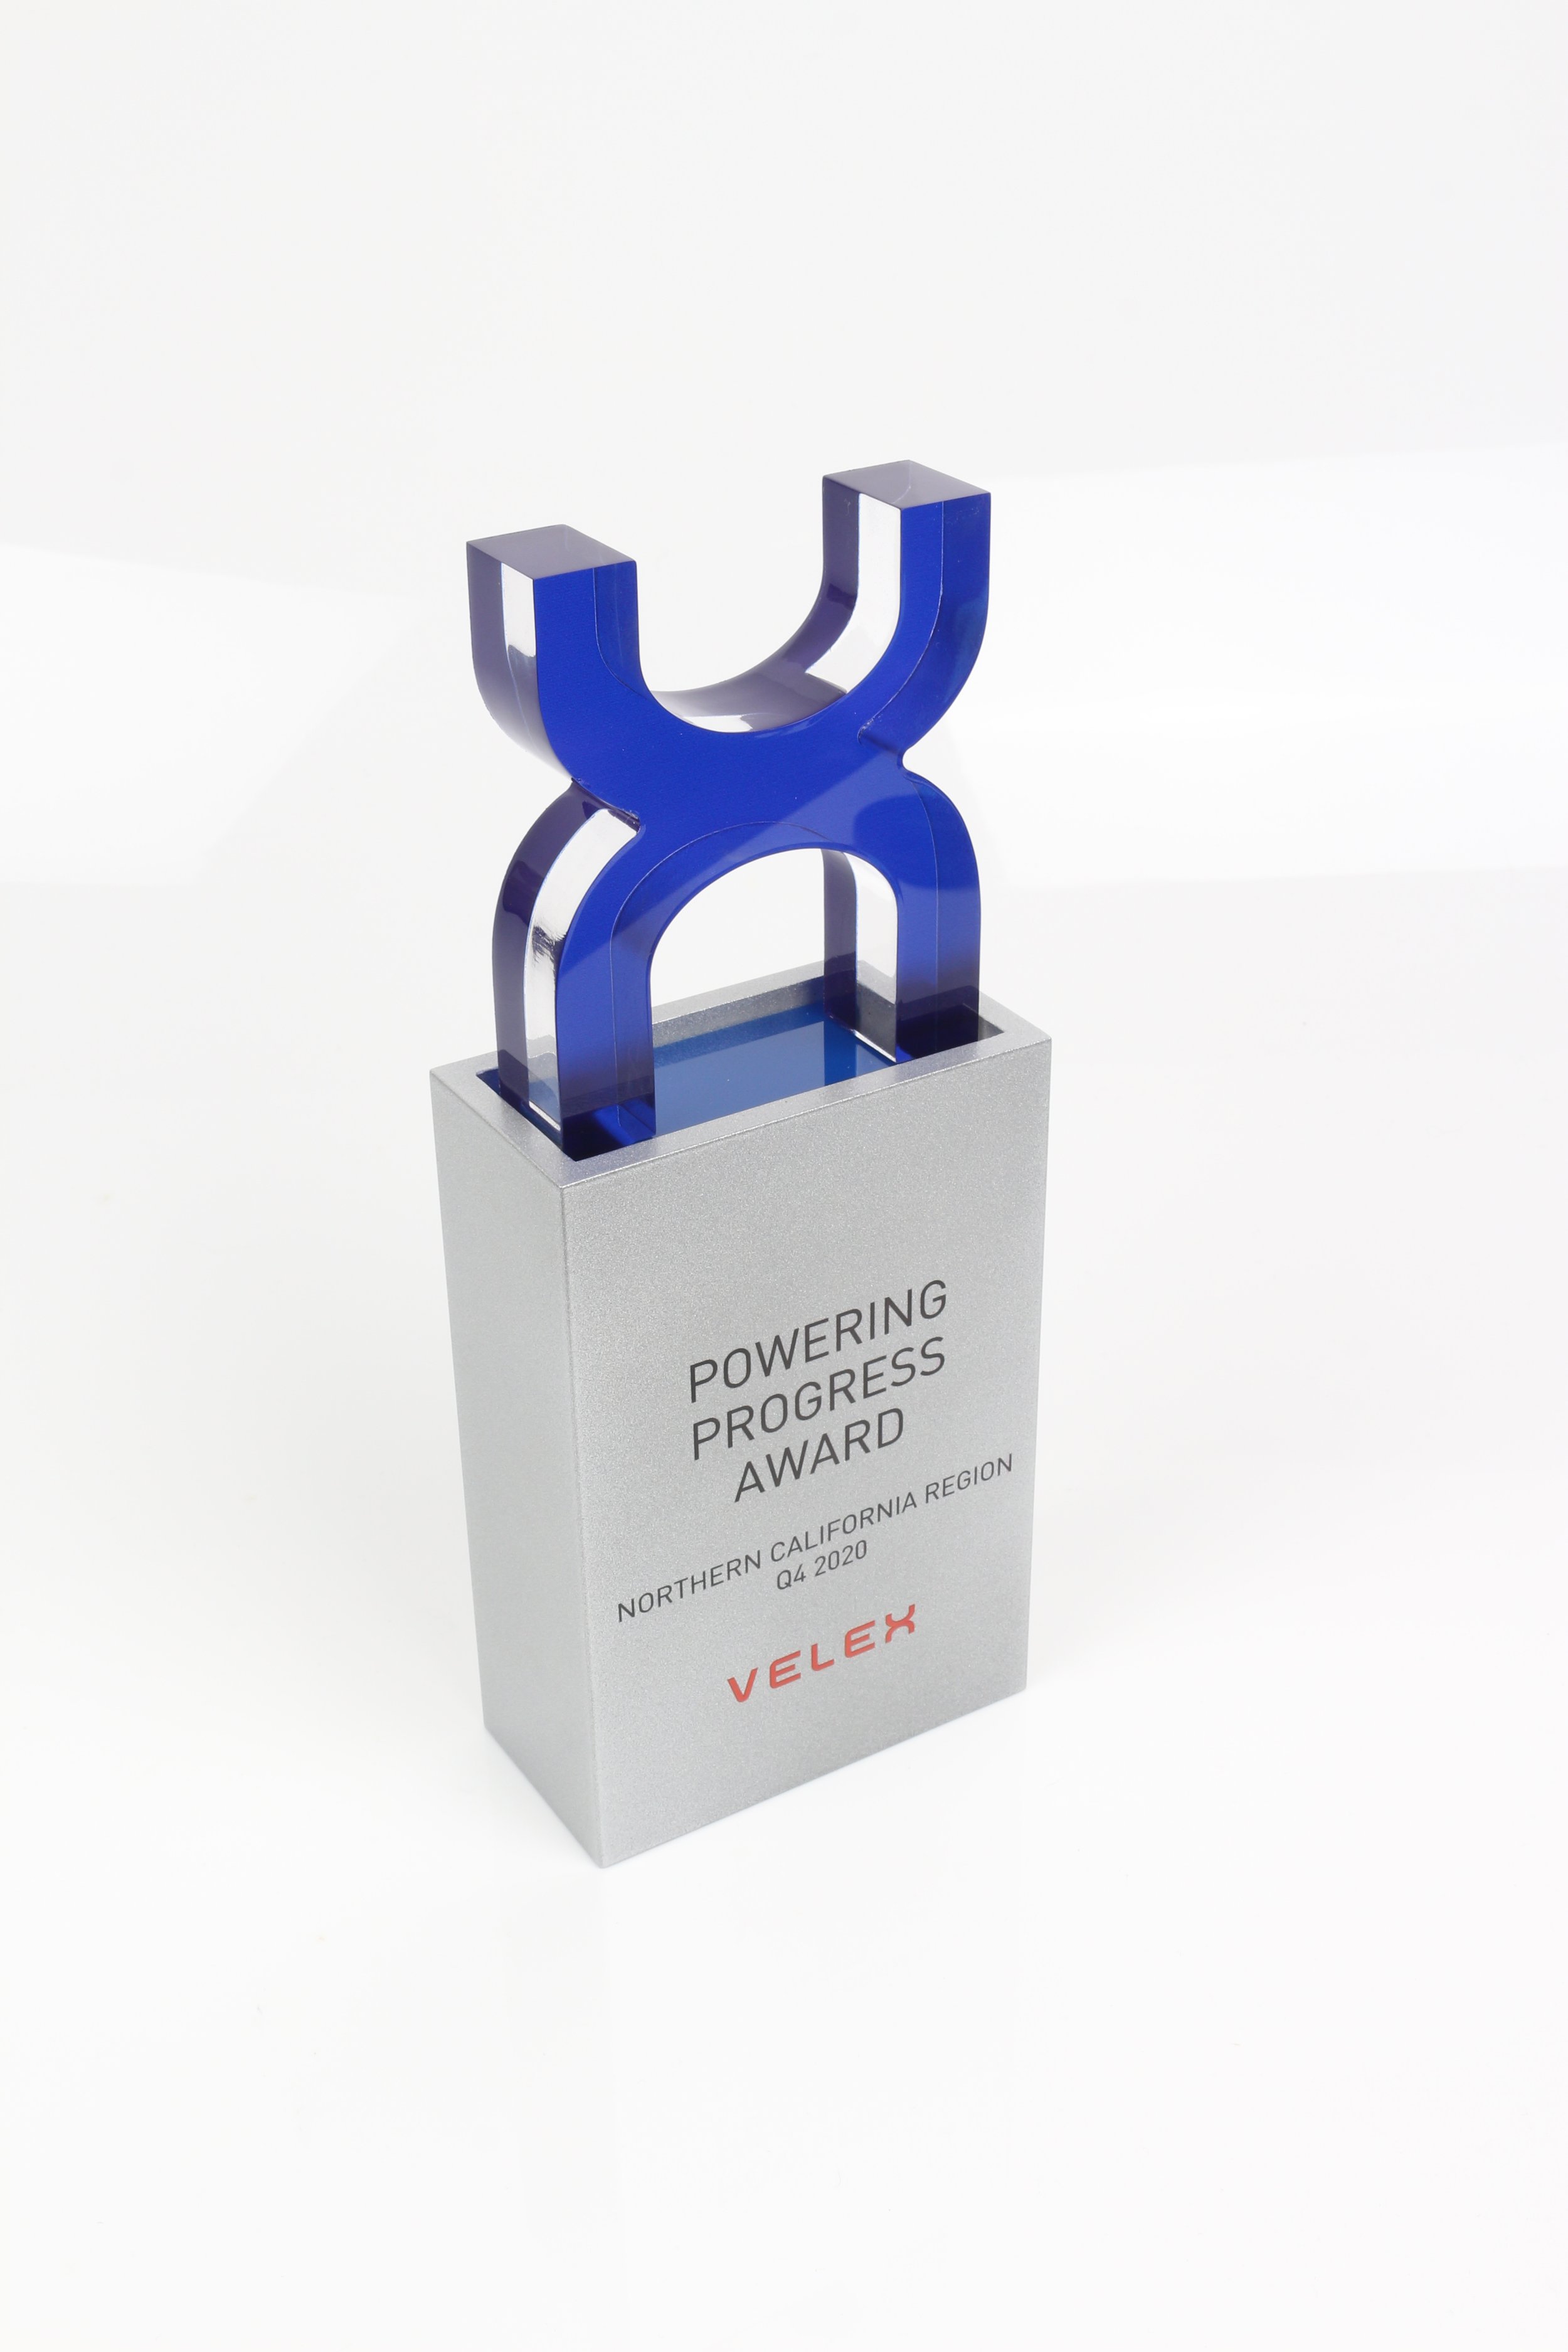 Custom designed and unique awards/trophies for corporate employee service recognition. Long term service awards. 